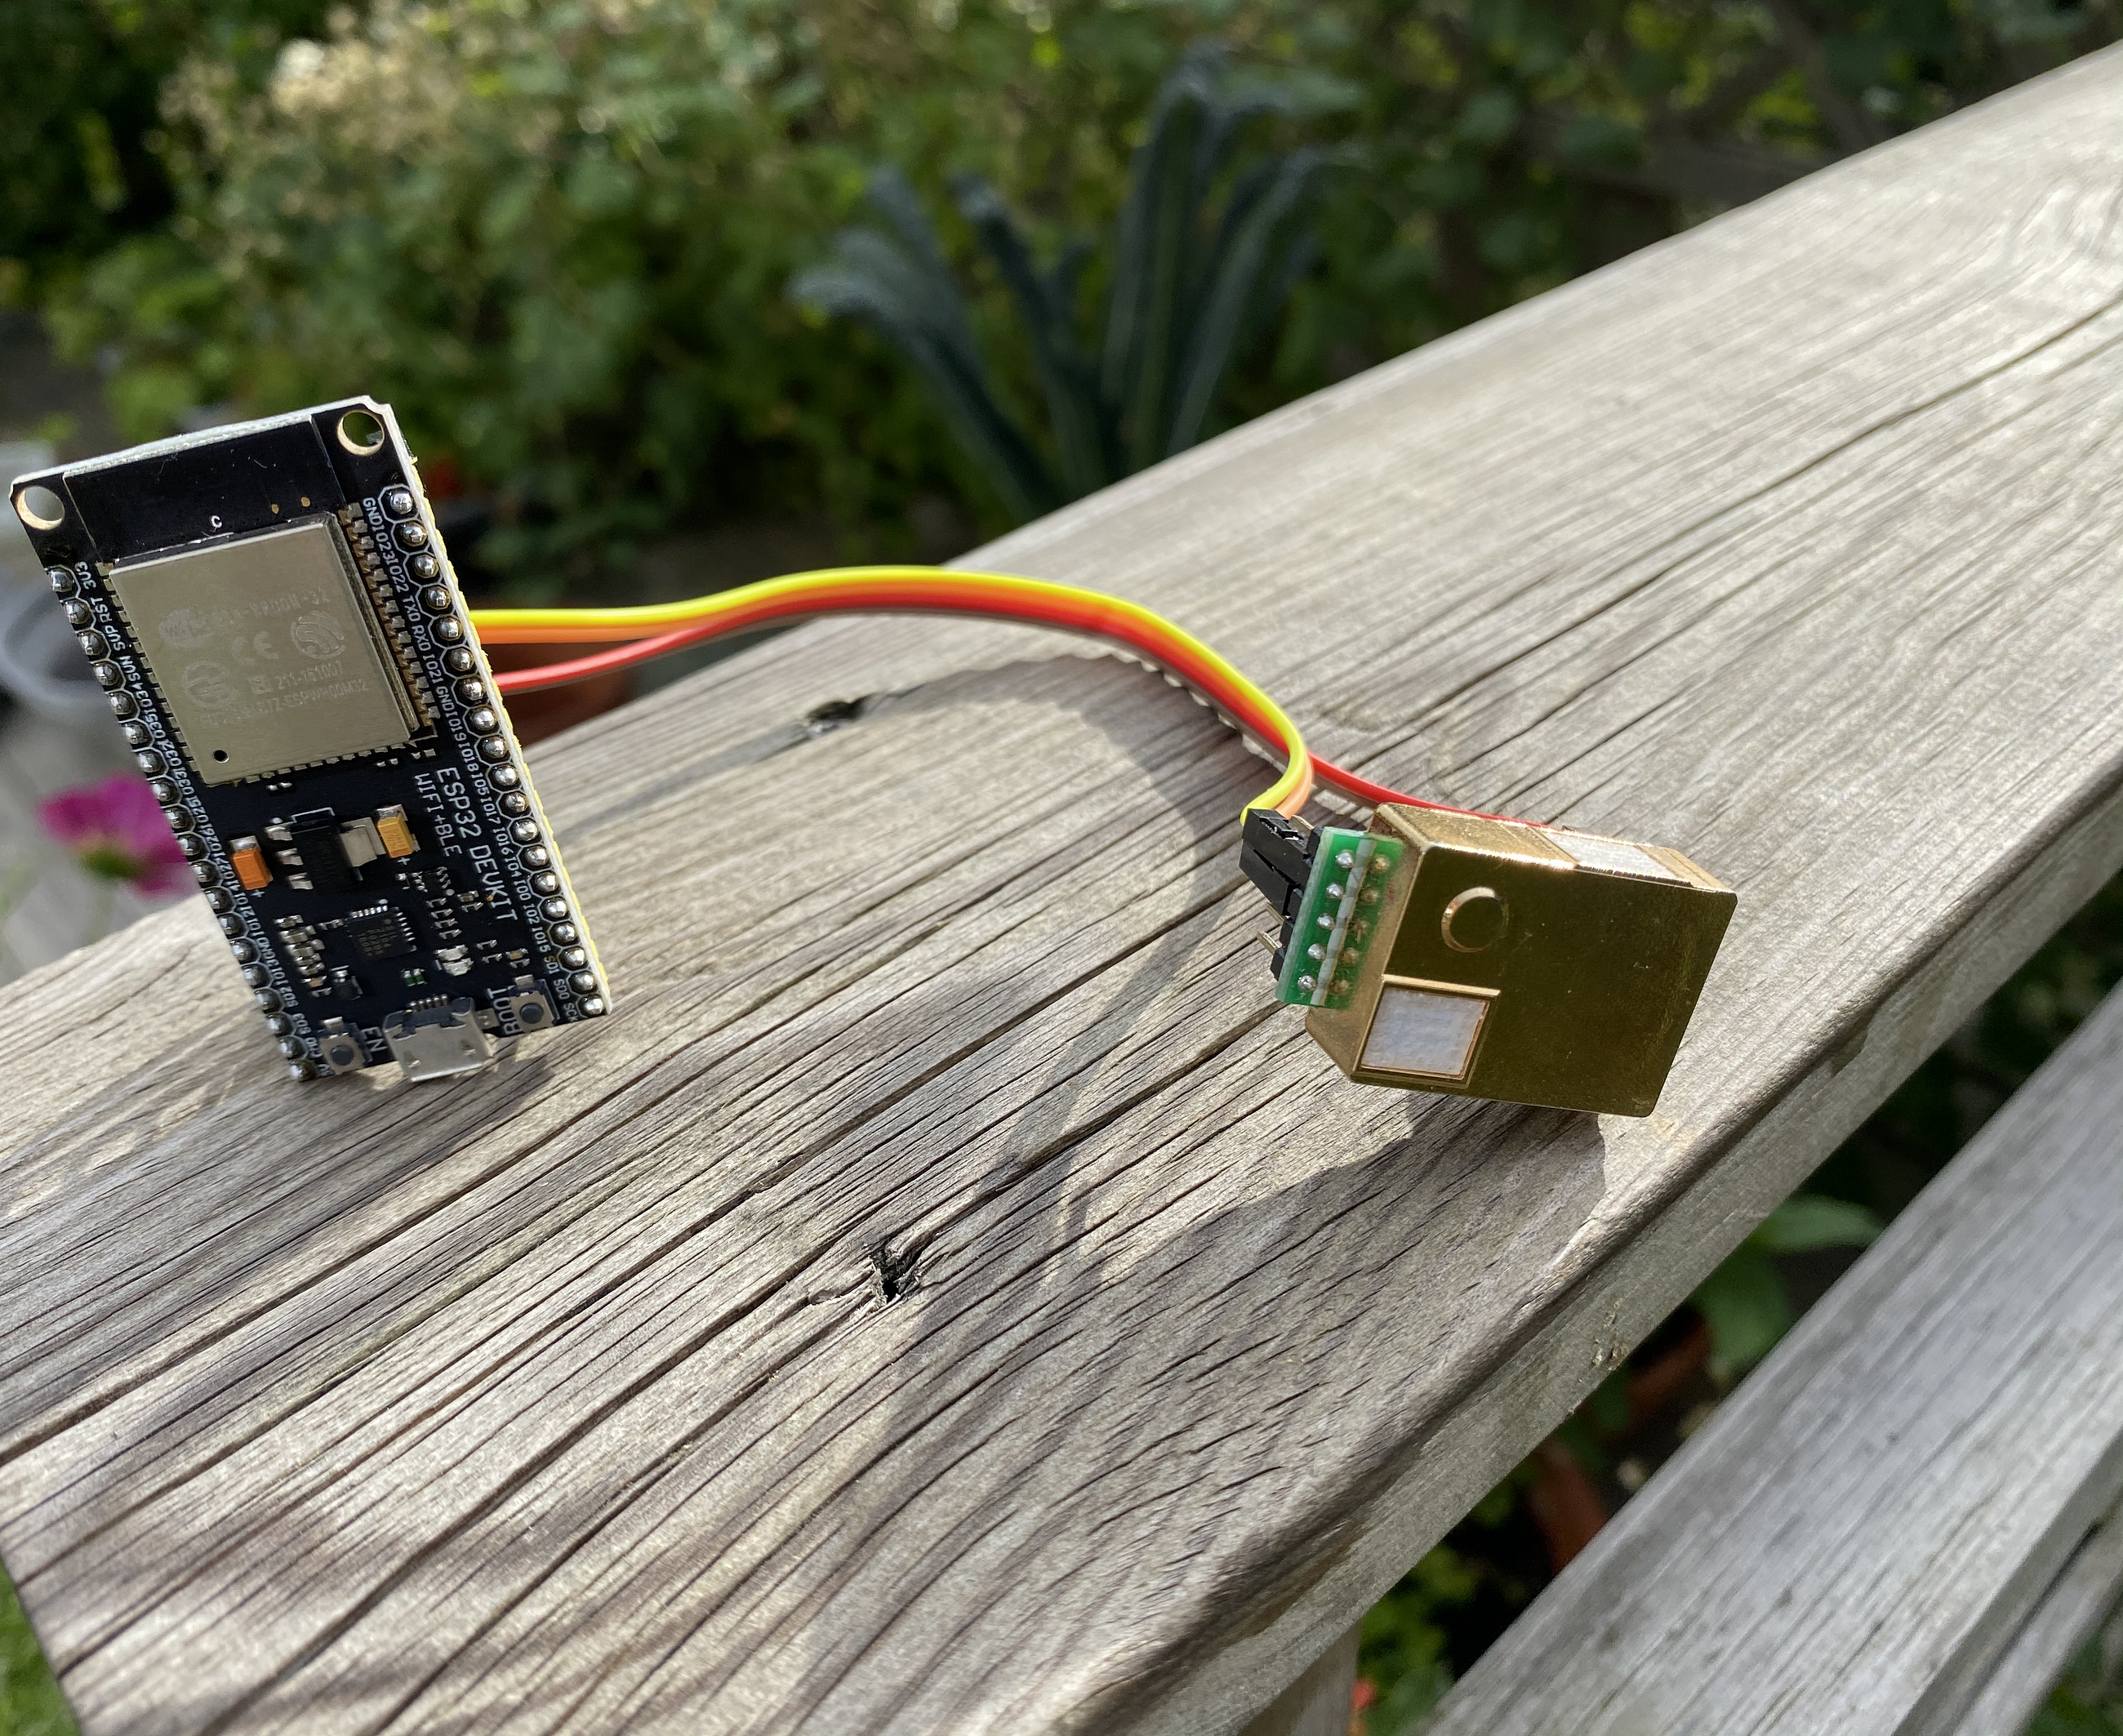 How to optimize your carbon dioxide (CO₂) levels for maximum productivity with ESP32